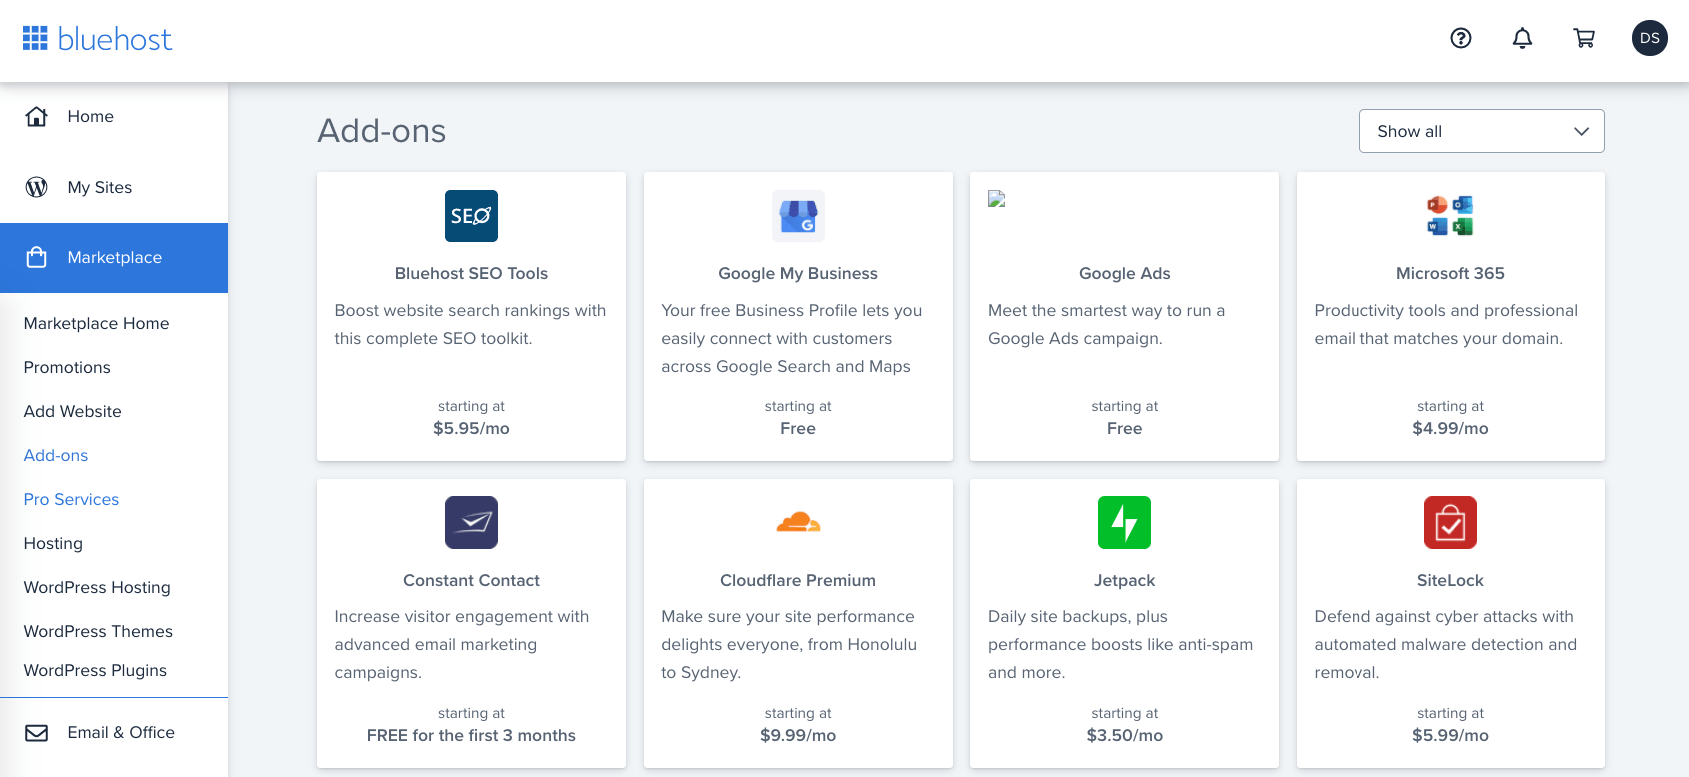 Bluehost hosting add-ons